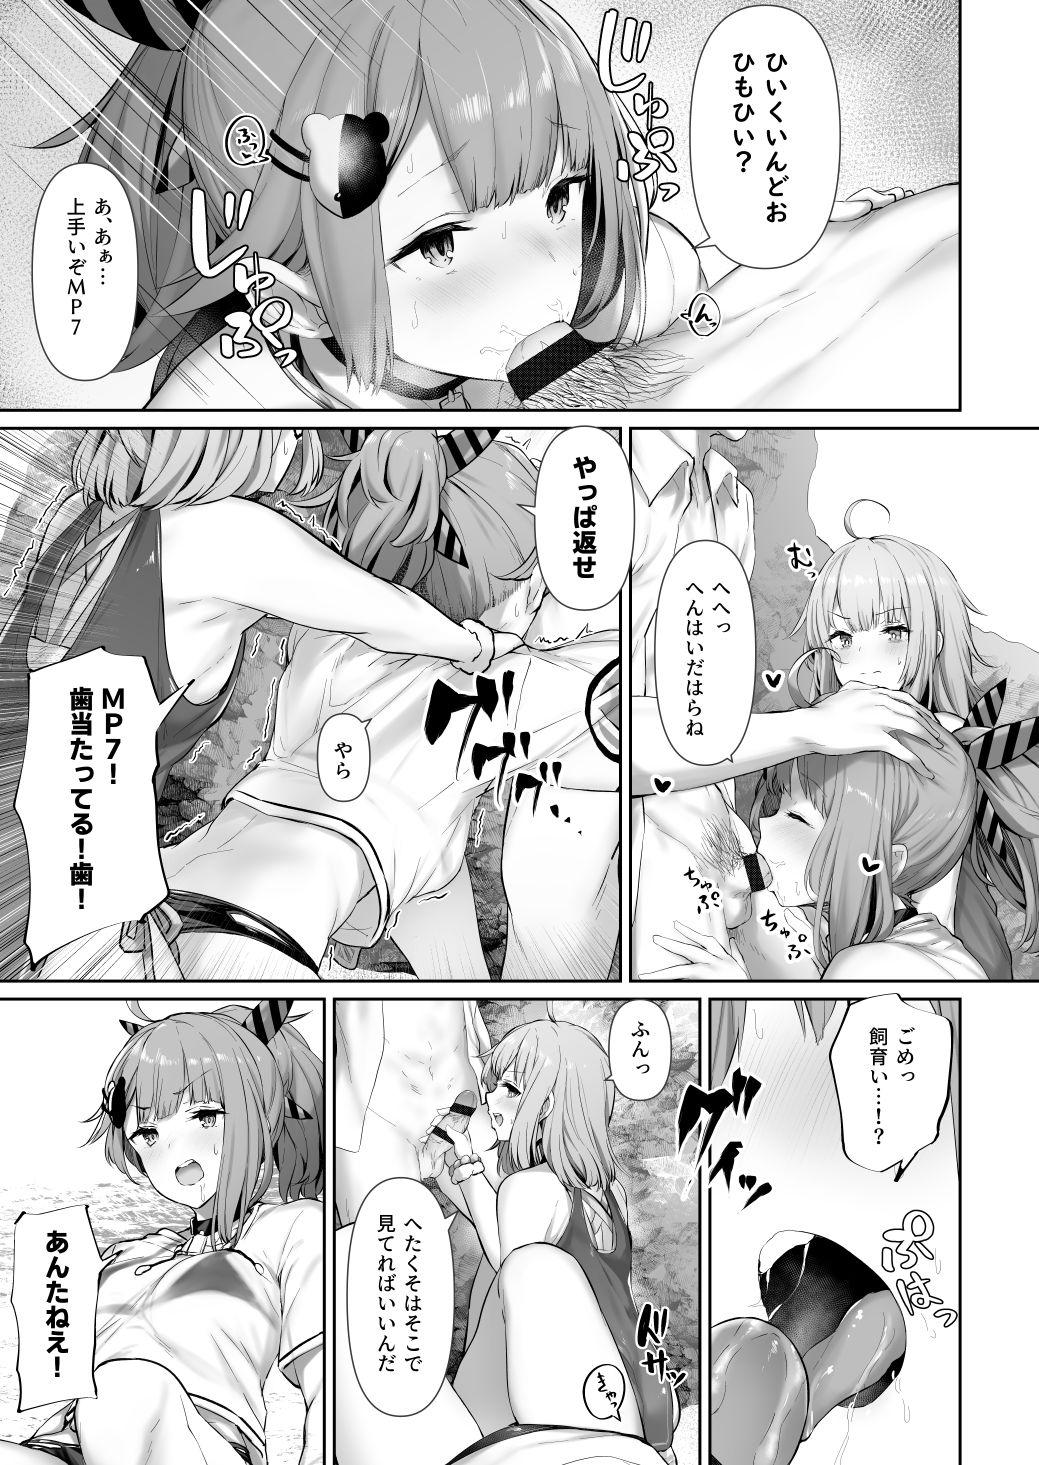 Wrestling MP7 and AA-12 - Girls frontline Gay Cut - Page 3